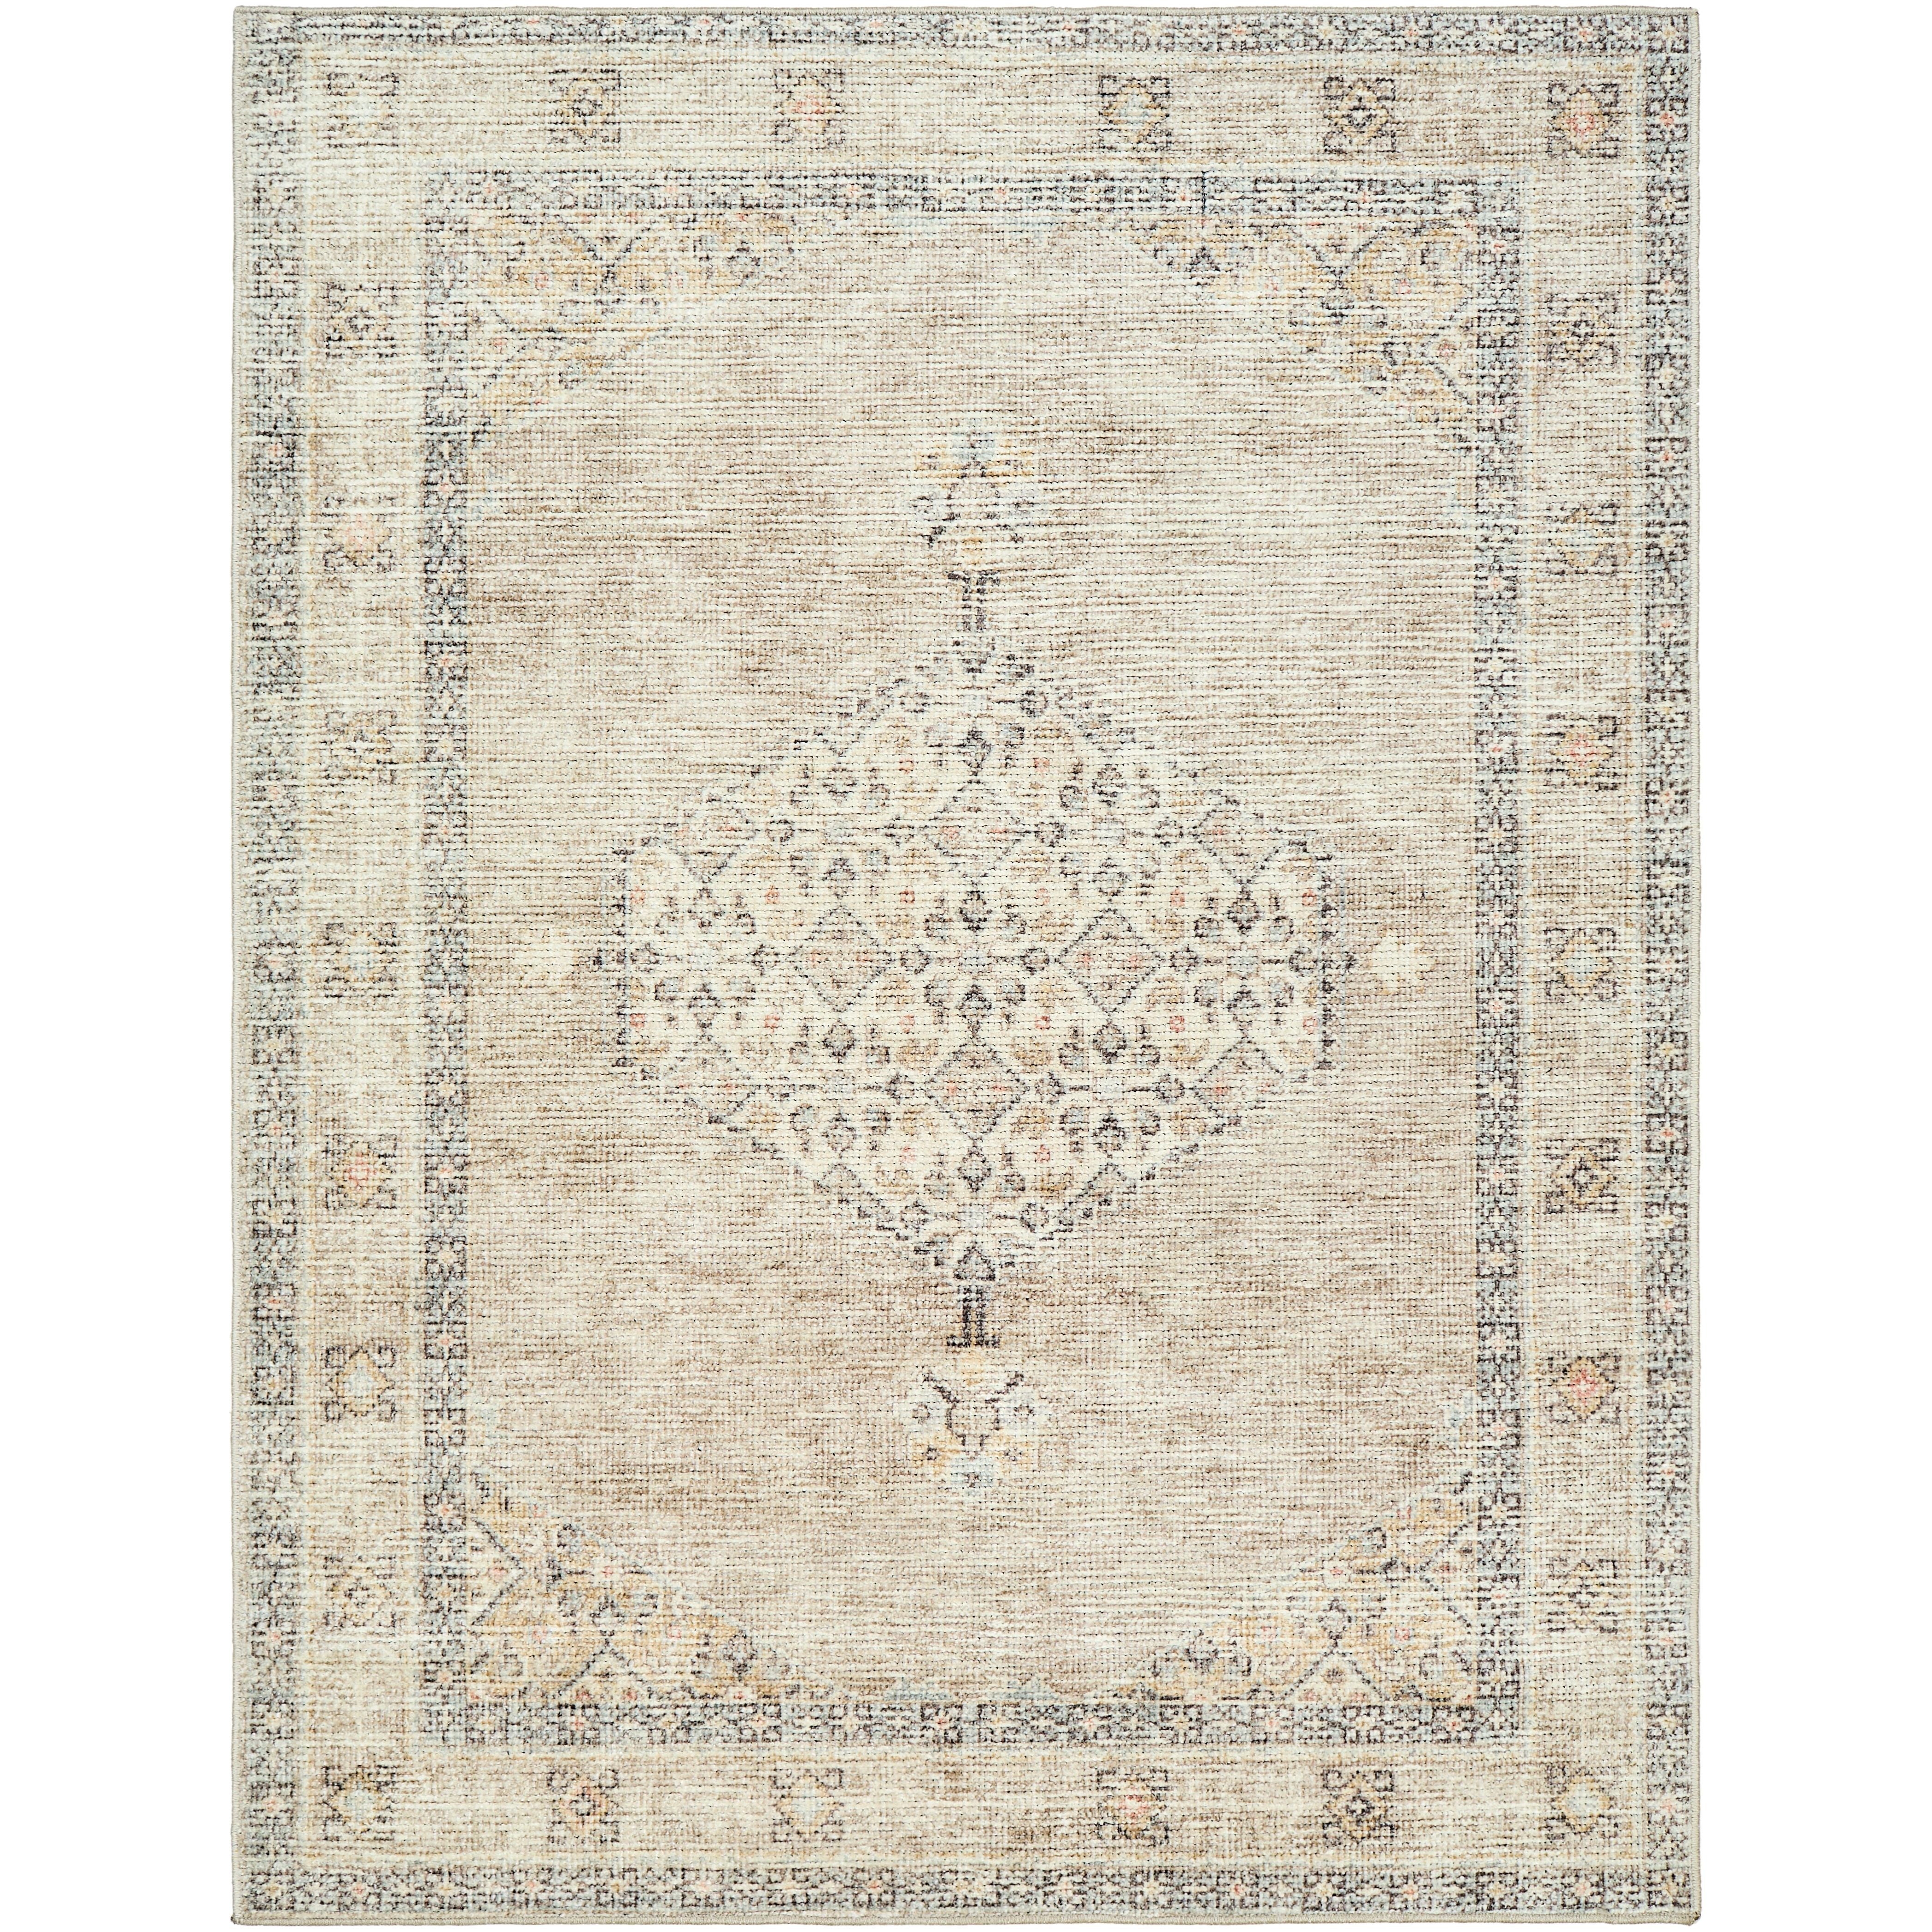 Brought to you by Becki Owens x Surya, the Lila Off White medallion area rug combines rich, detailed design with warm soft neutrals and tones to create an inviting space that will always feel familiar. Amethyst Home provides interior design, new construction, custom furniture, and area rugs in the Kansas City metro area.